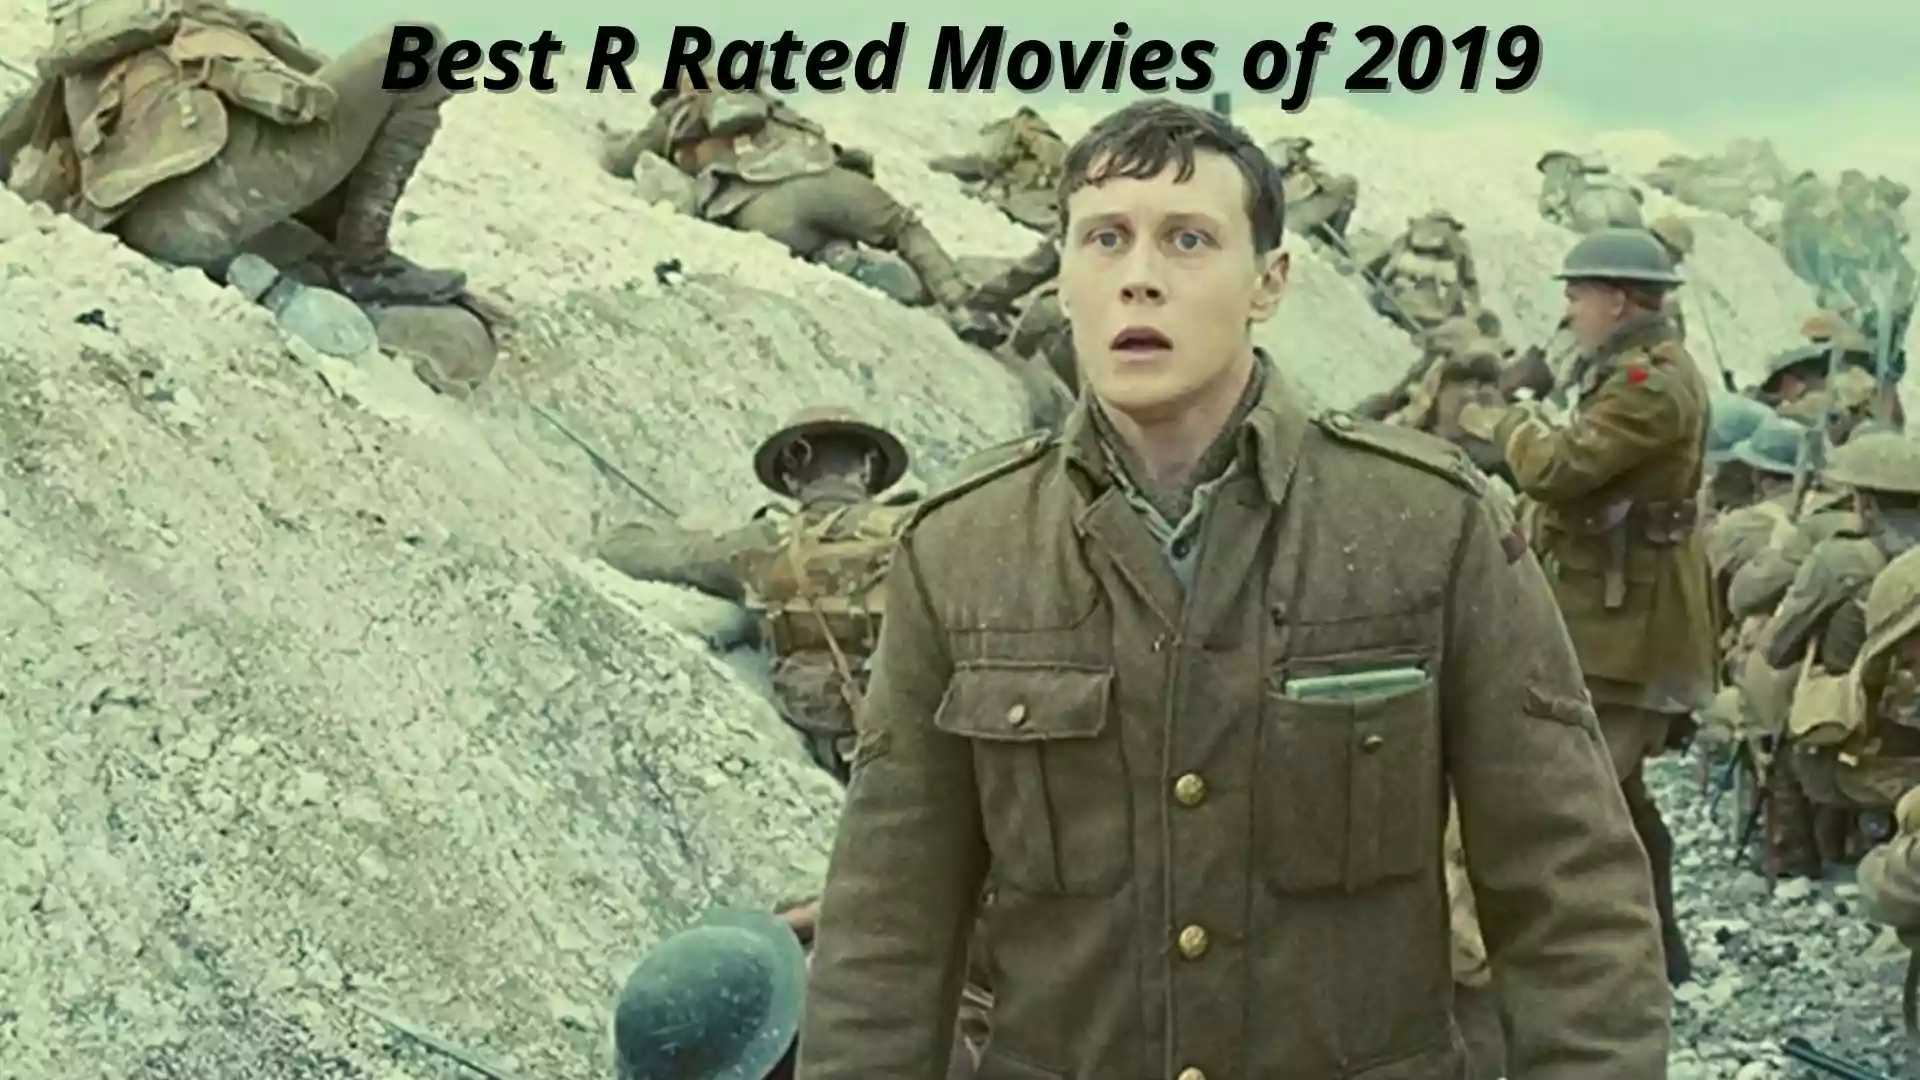 Best R Rated Movies of 2019